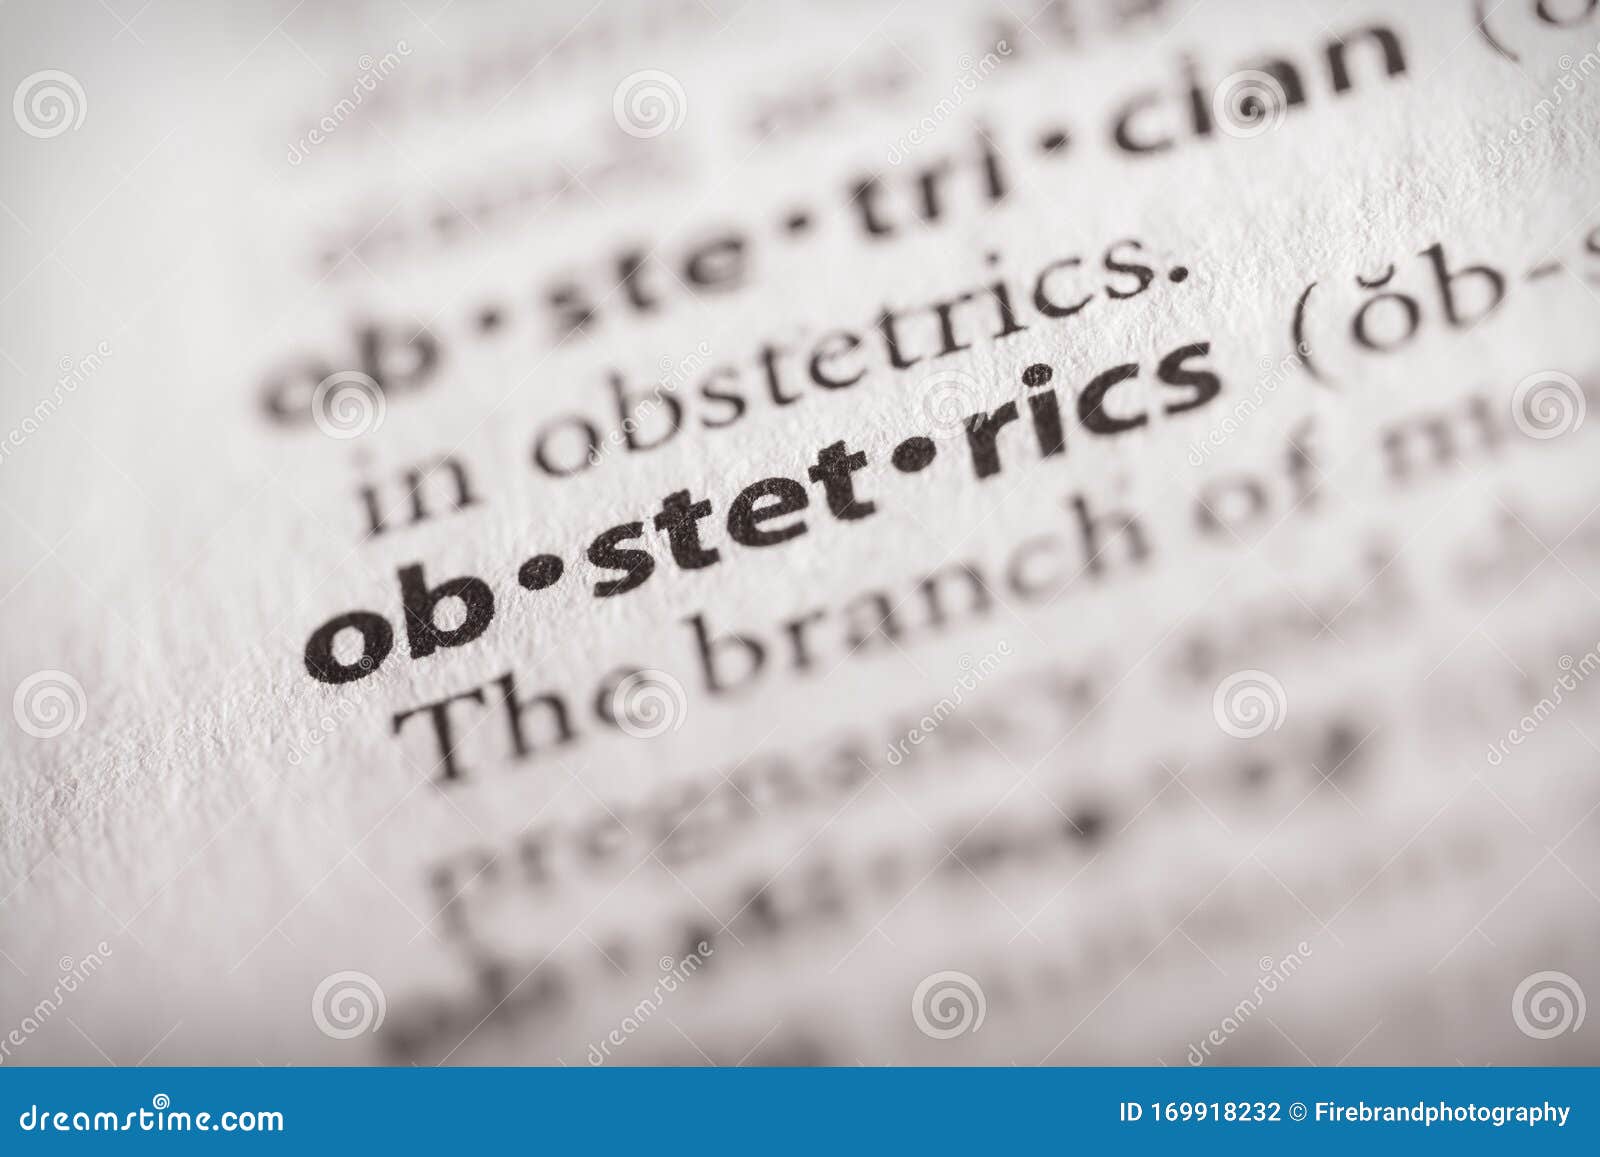 dictionary word series - obstetrics